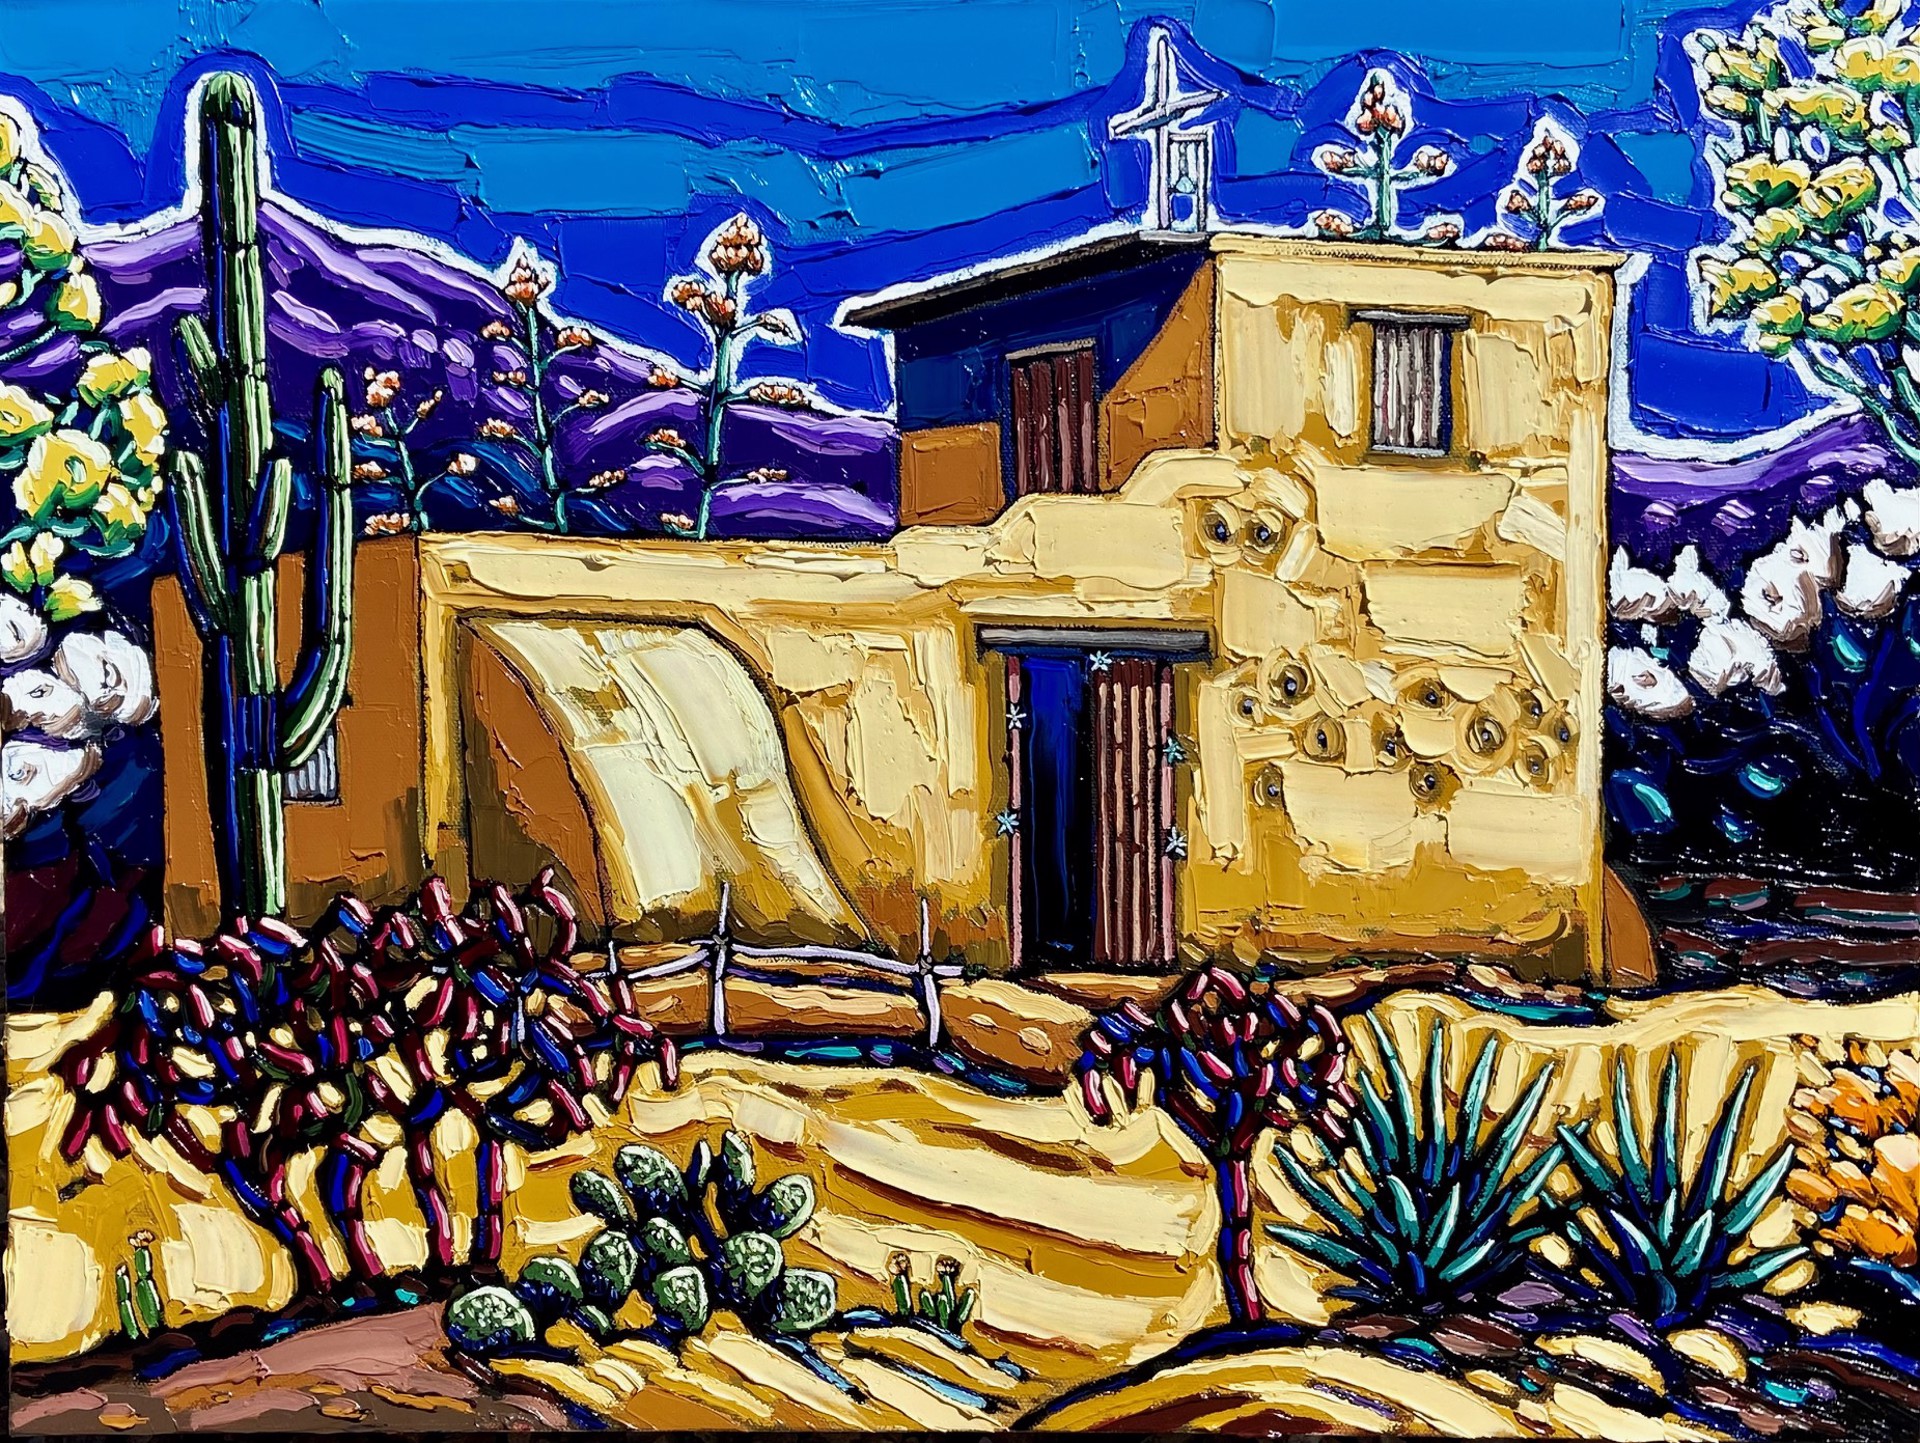 DeGrazia Gallery of the Sun, Tucson by Neil Myers